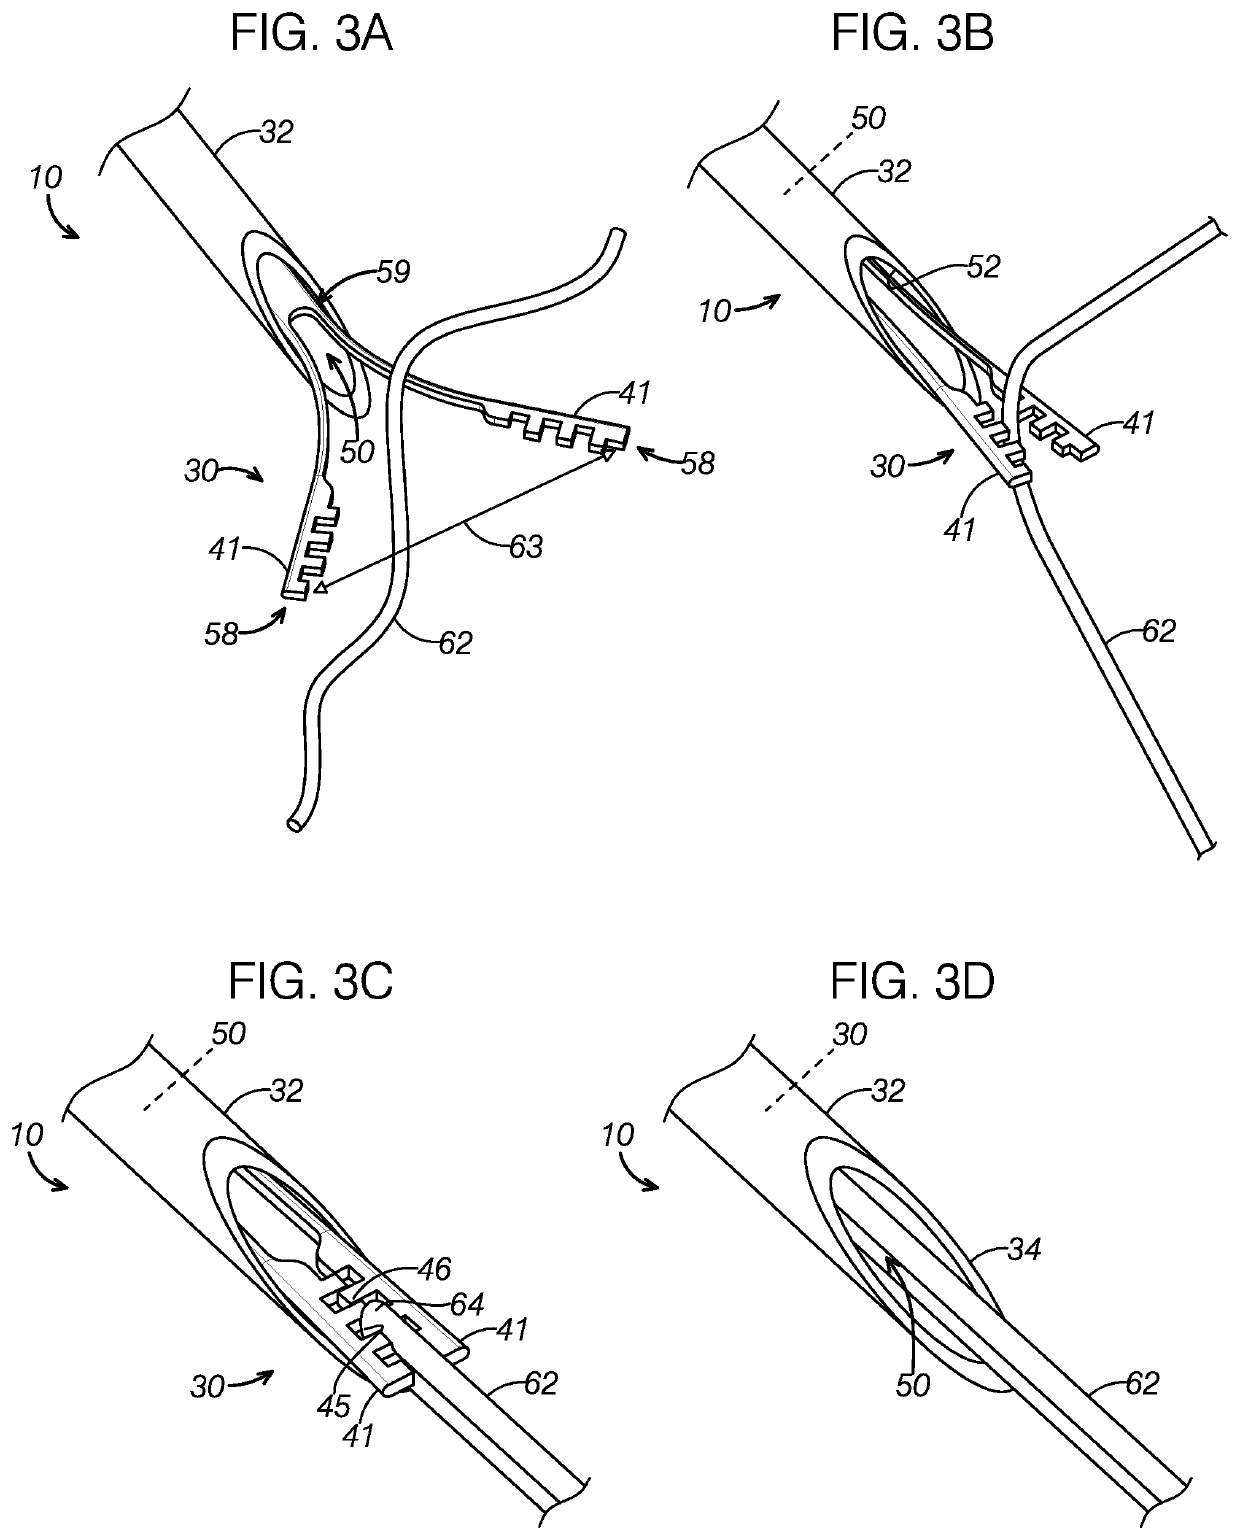 Suture passing device